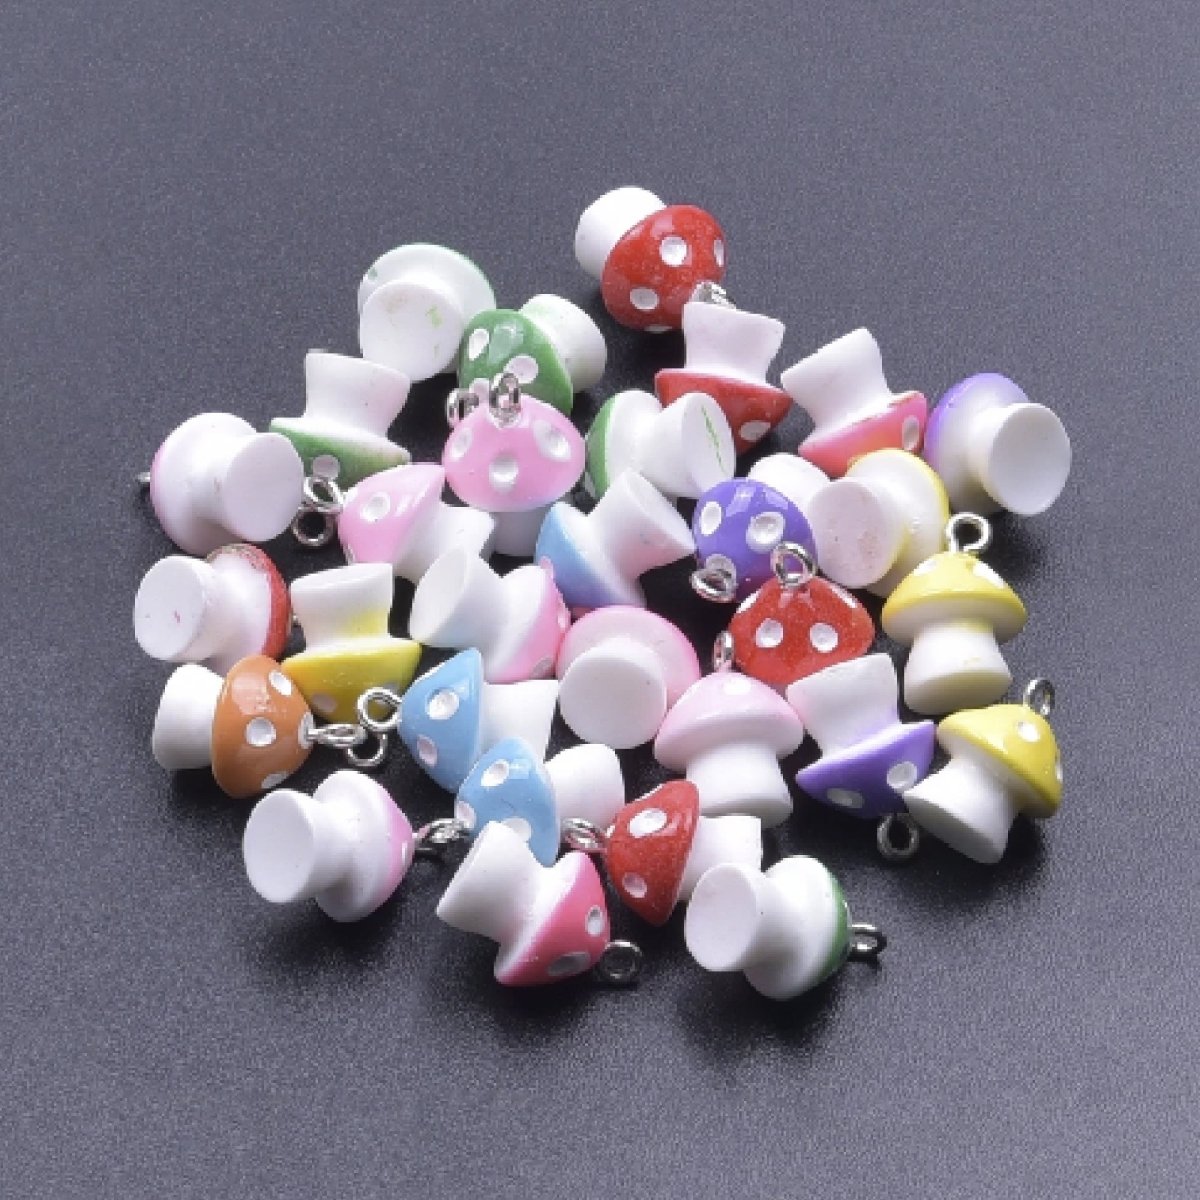 10pcs Miniature Mini Garden Animal Figurines Charms with Loop Pendant Craft - Opaque Mushrooms - Asia Sell